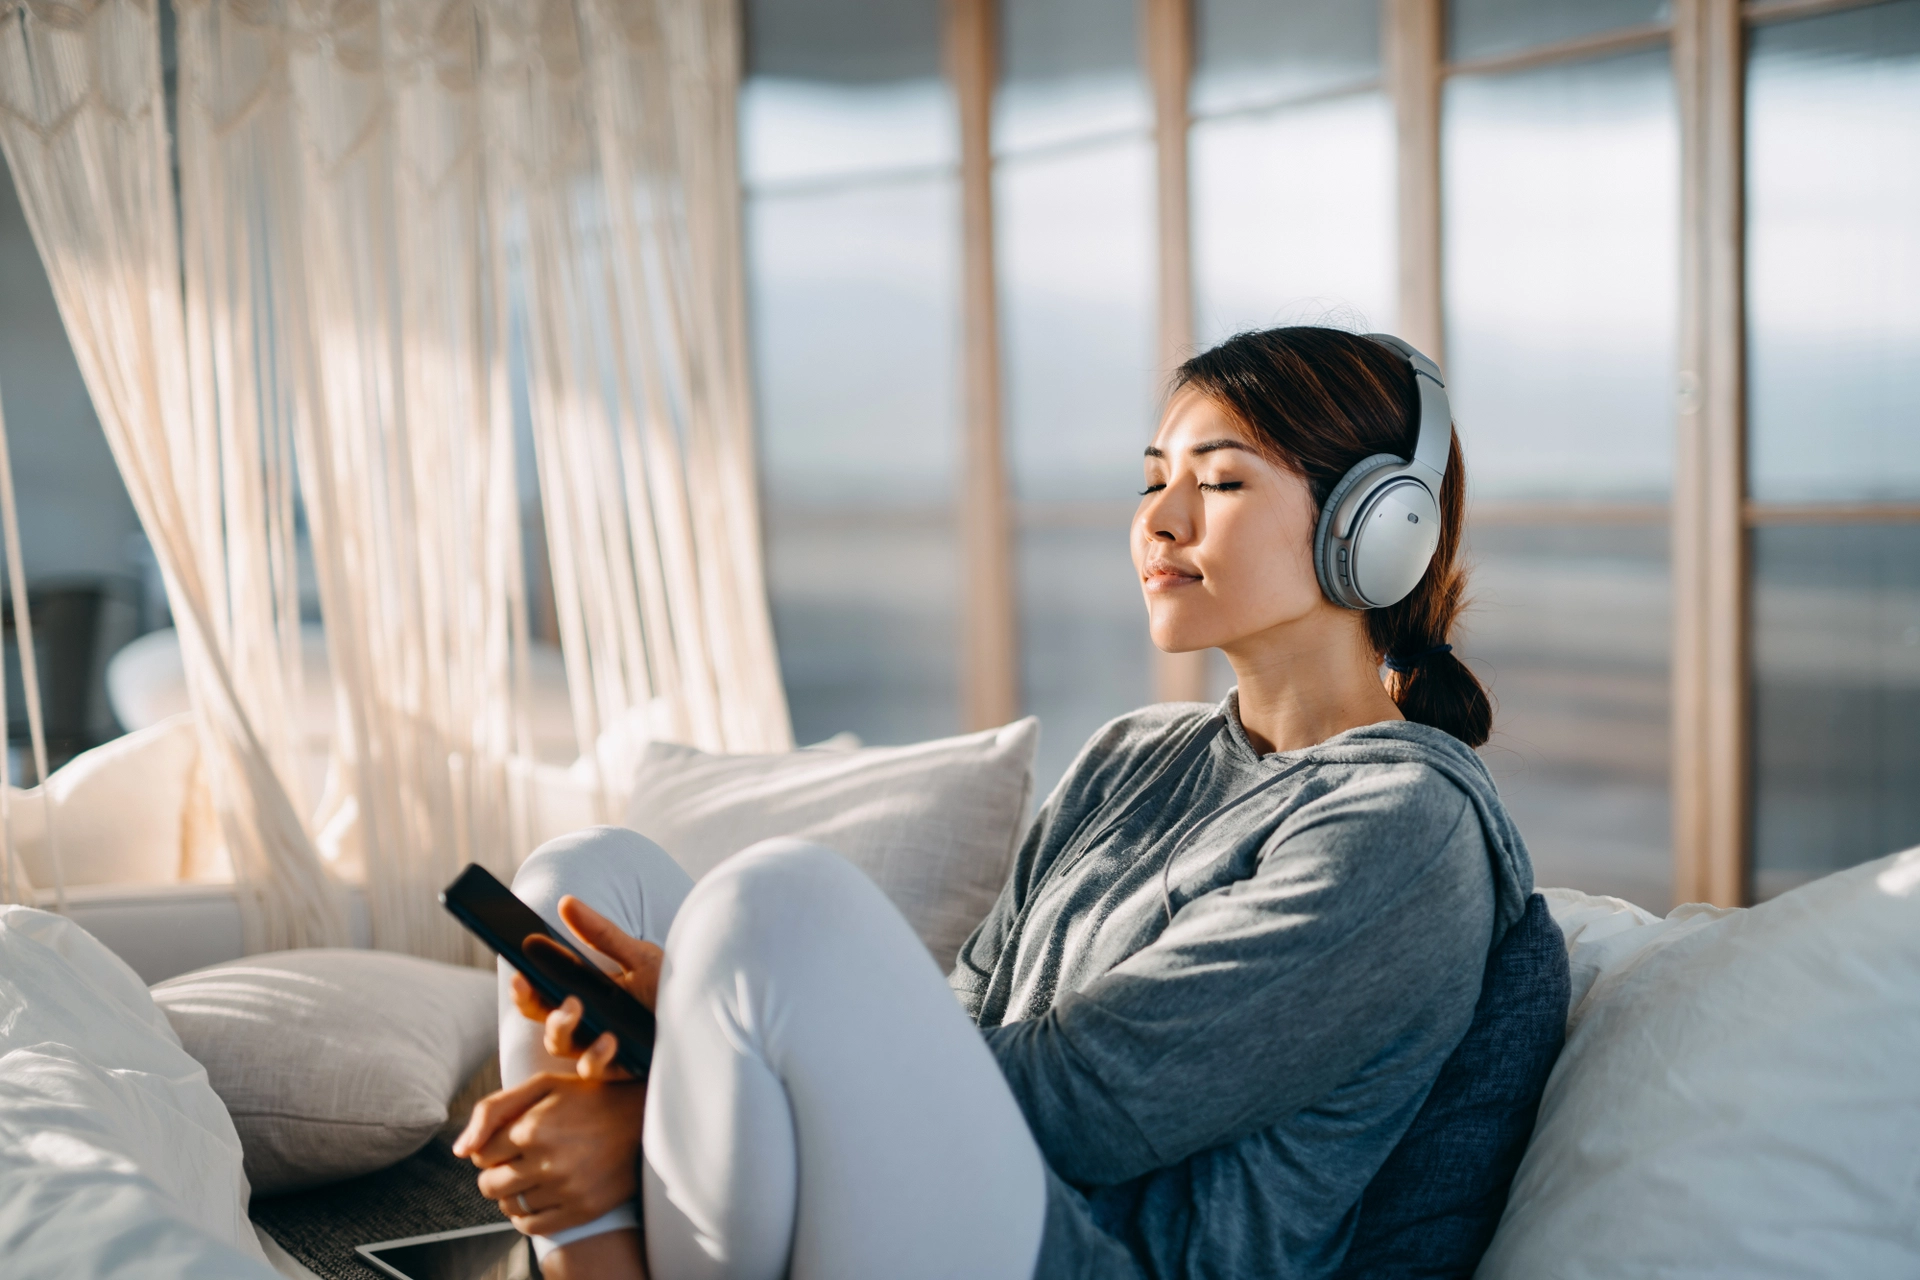 Relaxed woman with eyes closed sitting on bed enjoying music over headphones